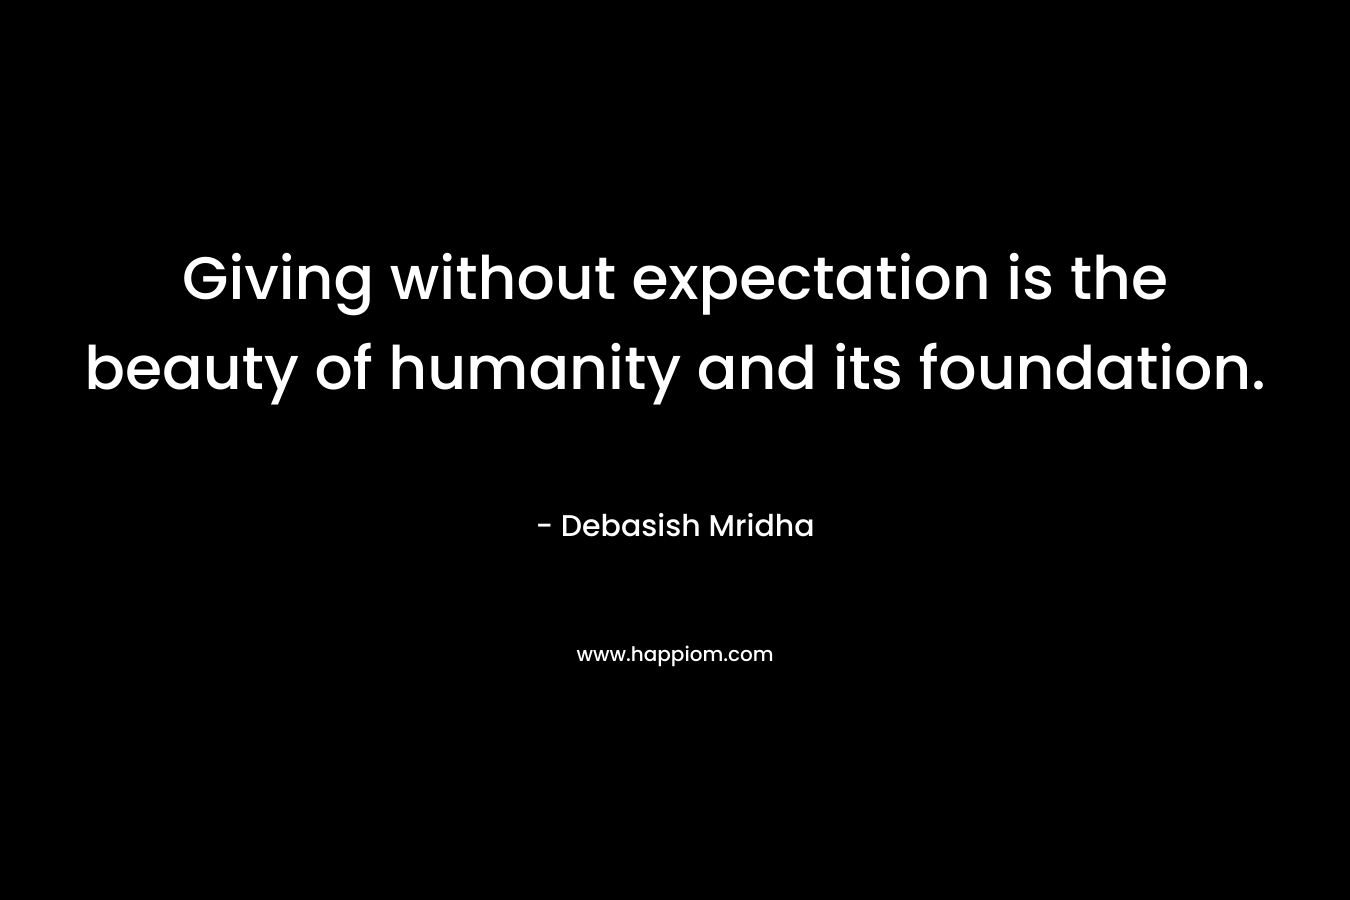 Giving without expectation is the beauty of humanity and its foundation.